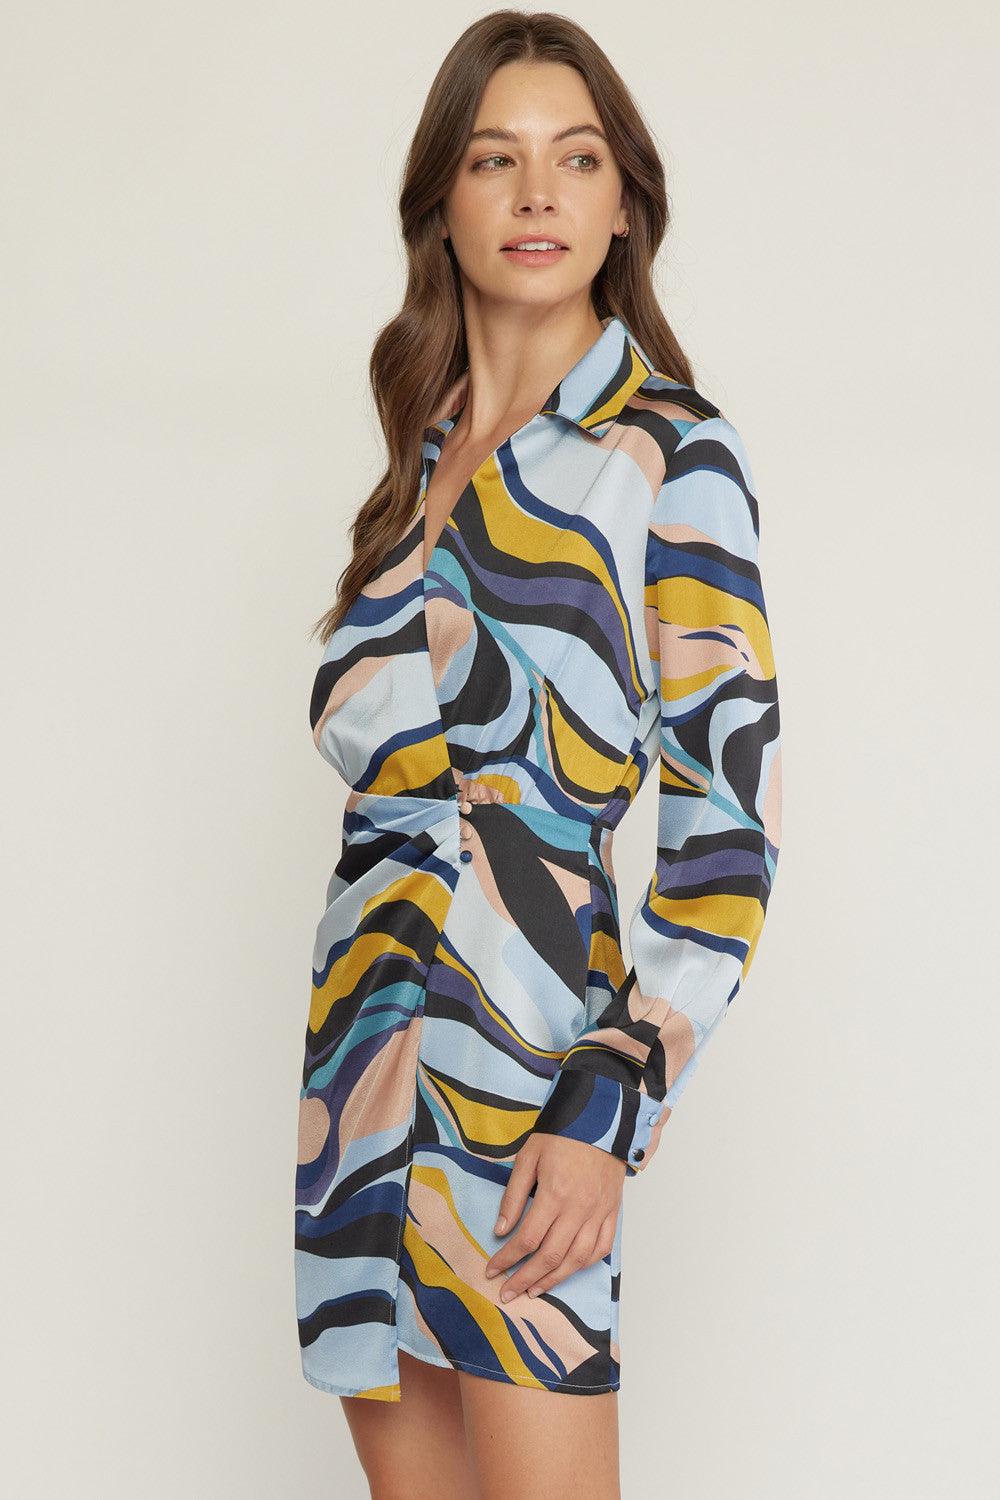 Swirl print collared v-neck wrap style mini dress - RK Collections Boutique